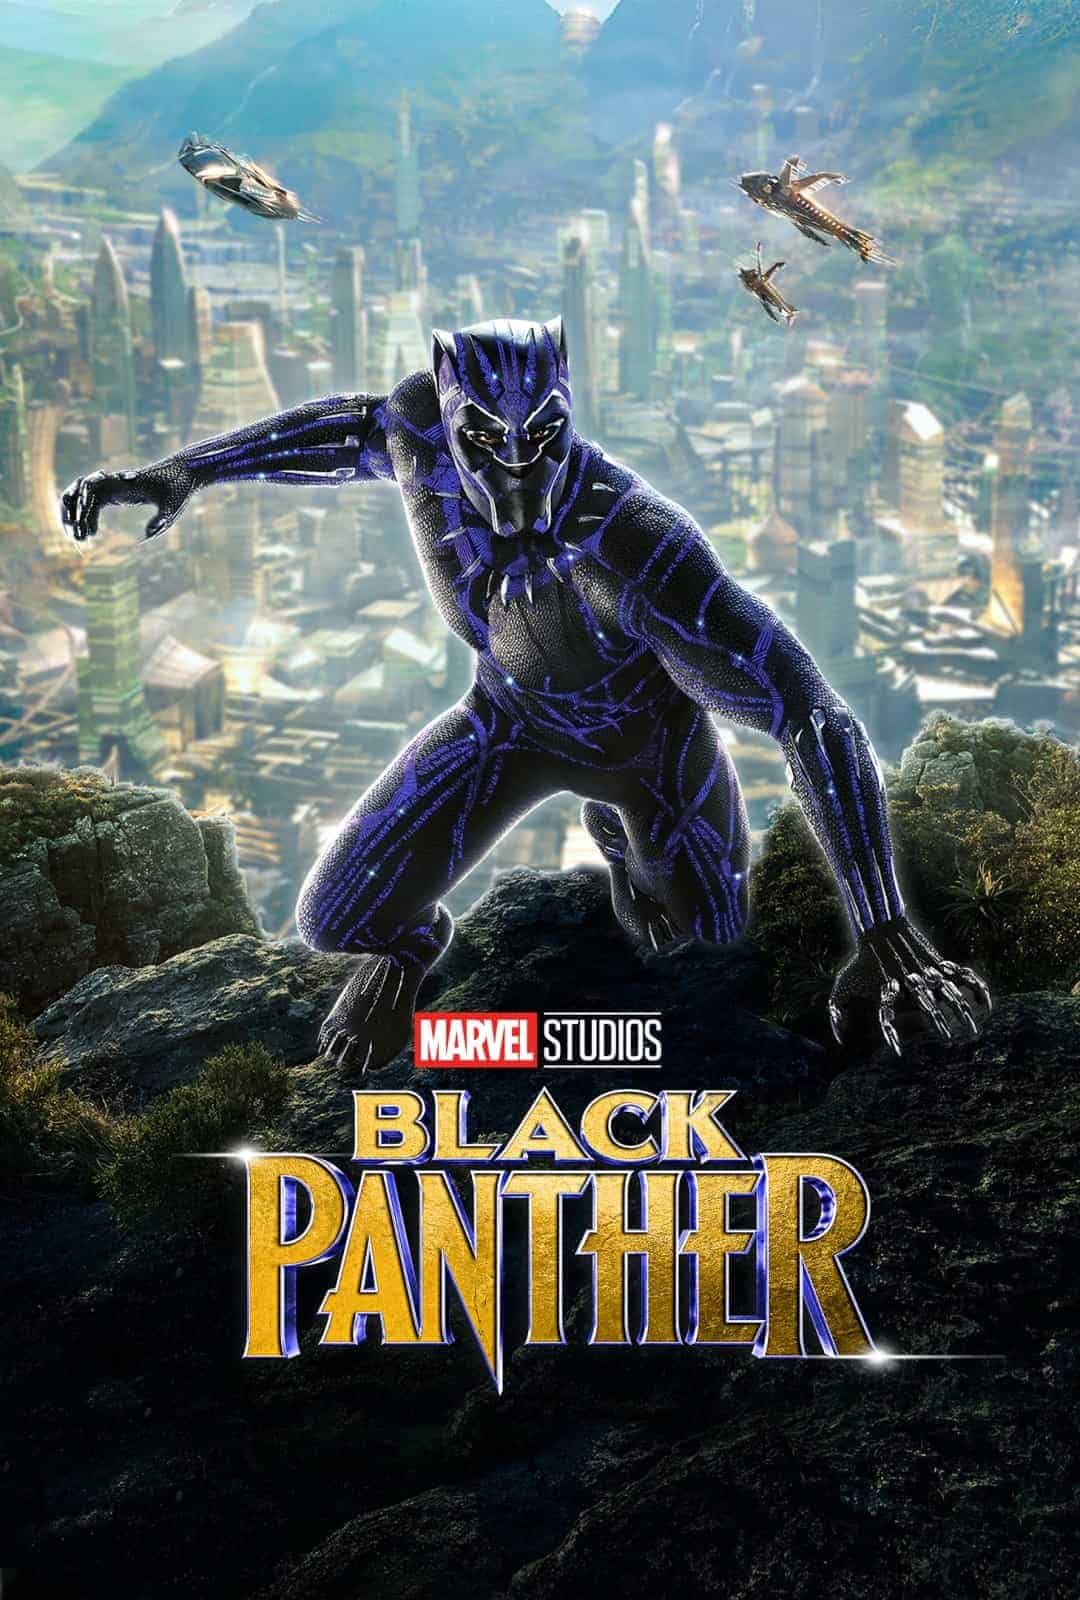 Black Panther 2018 Tamil Dubbed Sci-Fi Movie Online